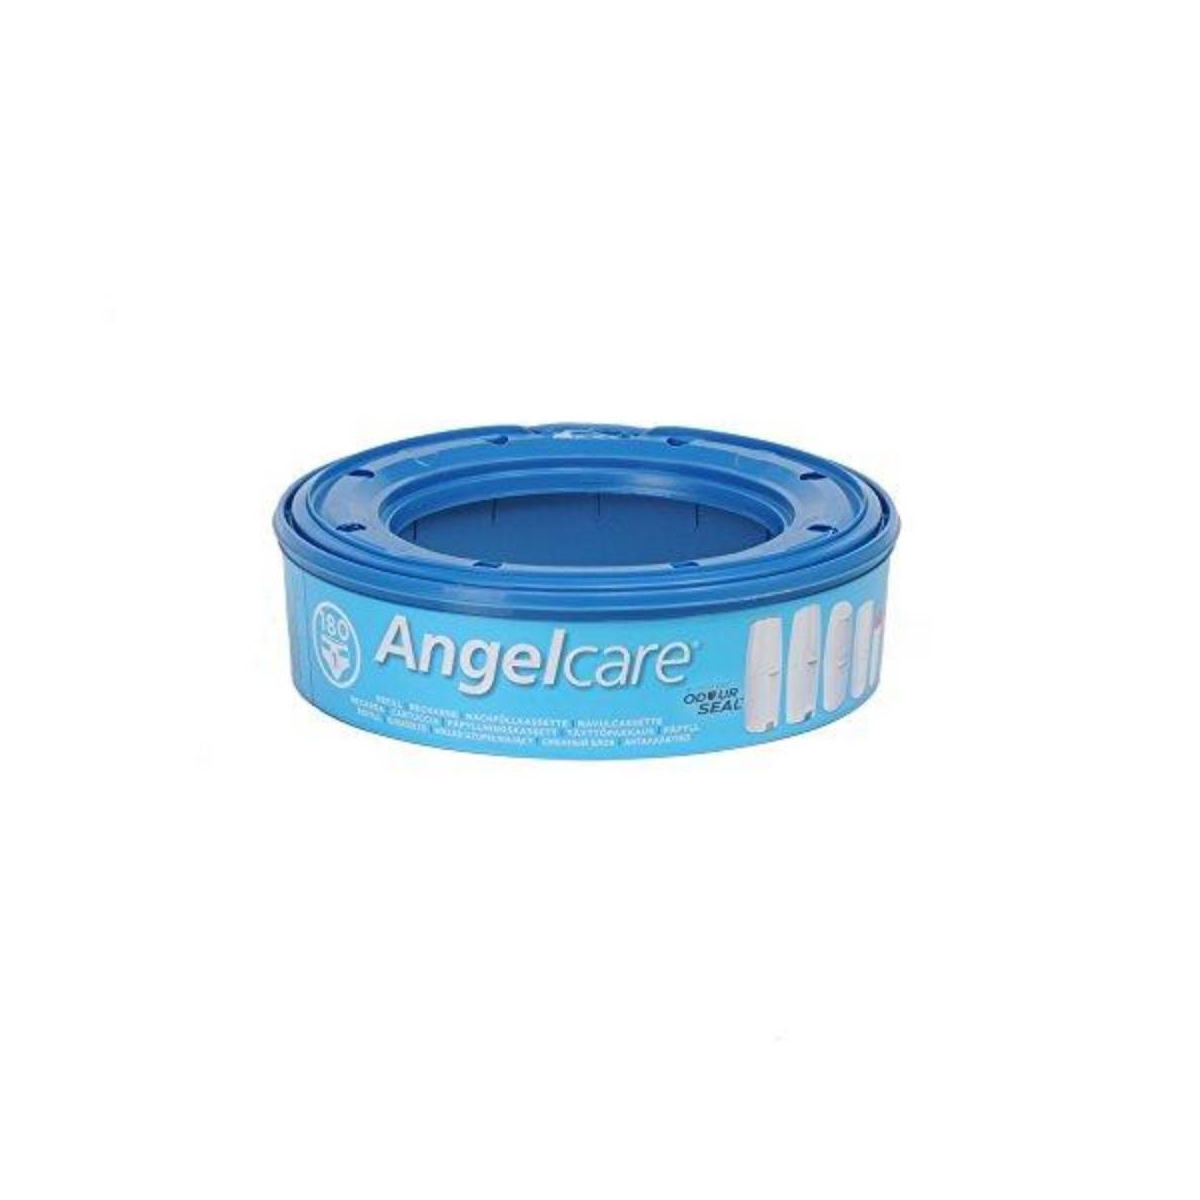 Angelcare Nappy Disposal System Refill Cassette